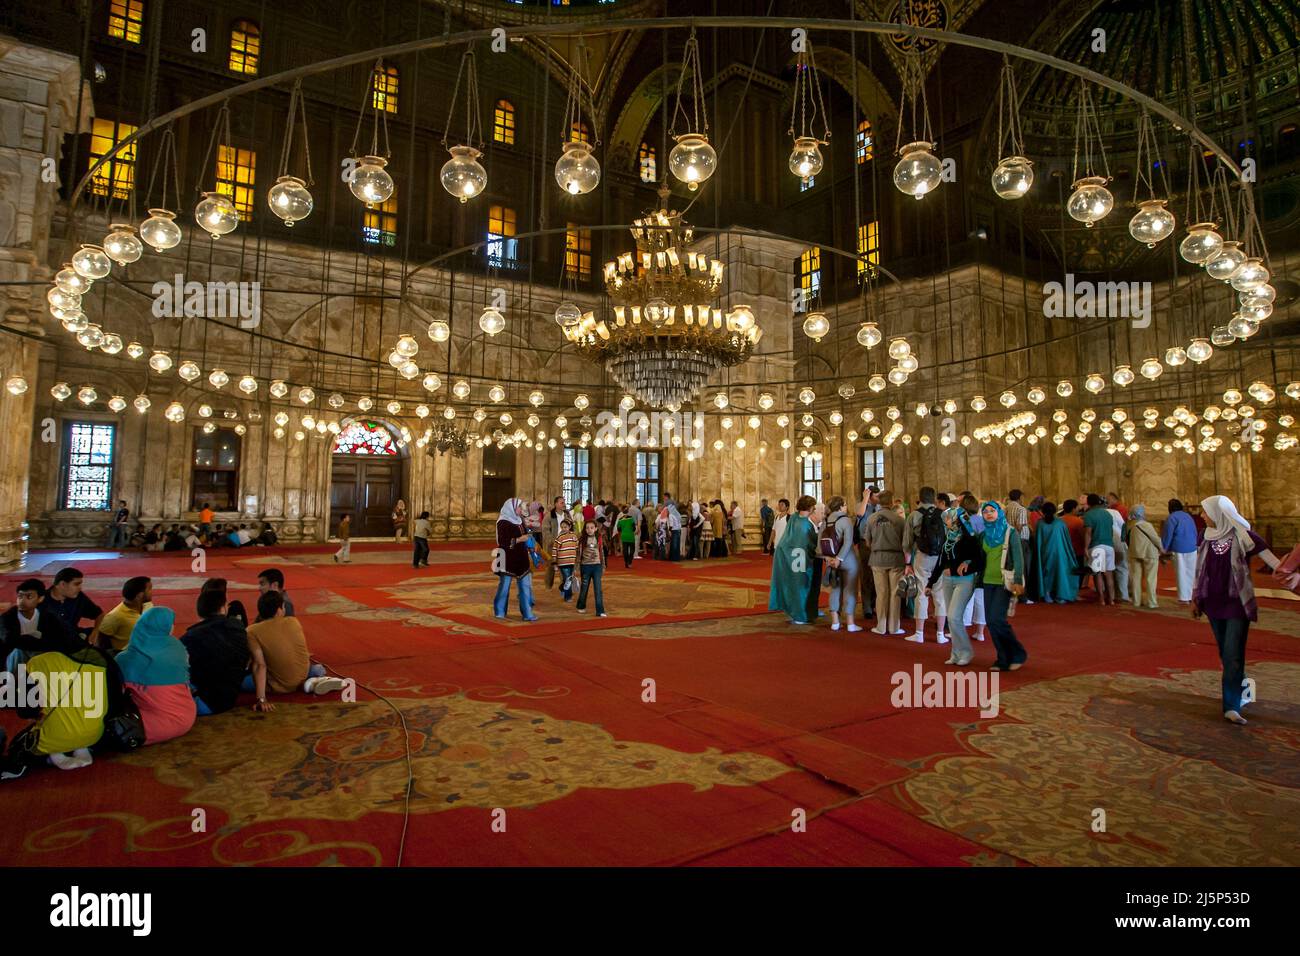 The interior of the Mosque of Muhammad Ali at the Cairo Citadel (Citadel of Salah Al-Din) in Cairo, Egypt. Stock Photo